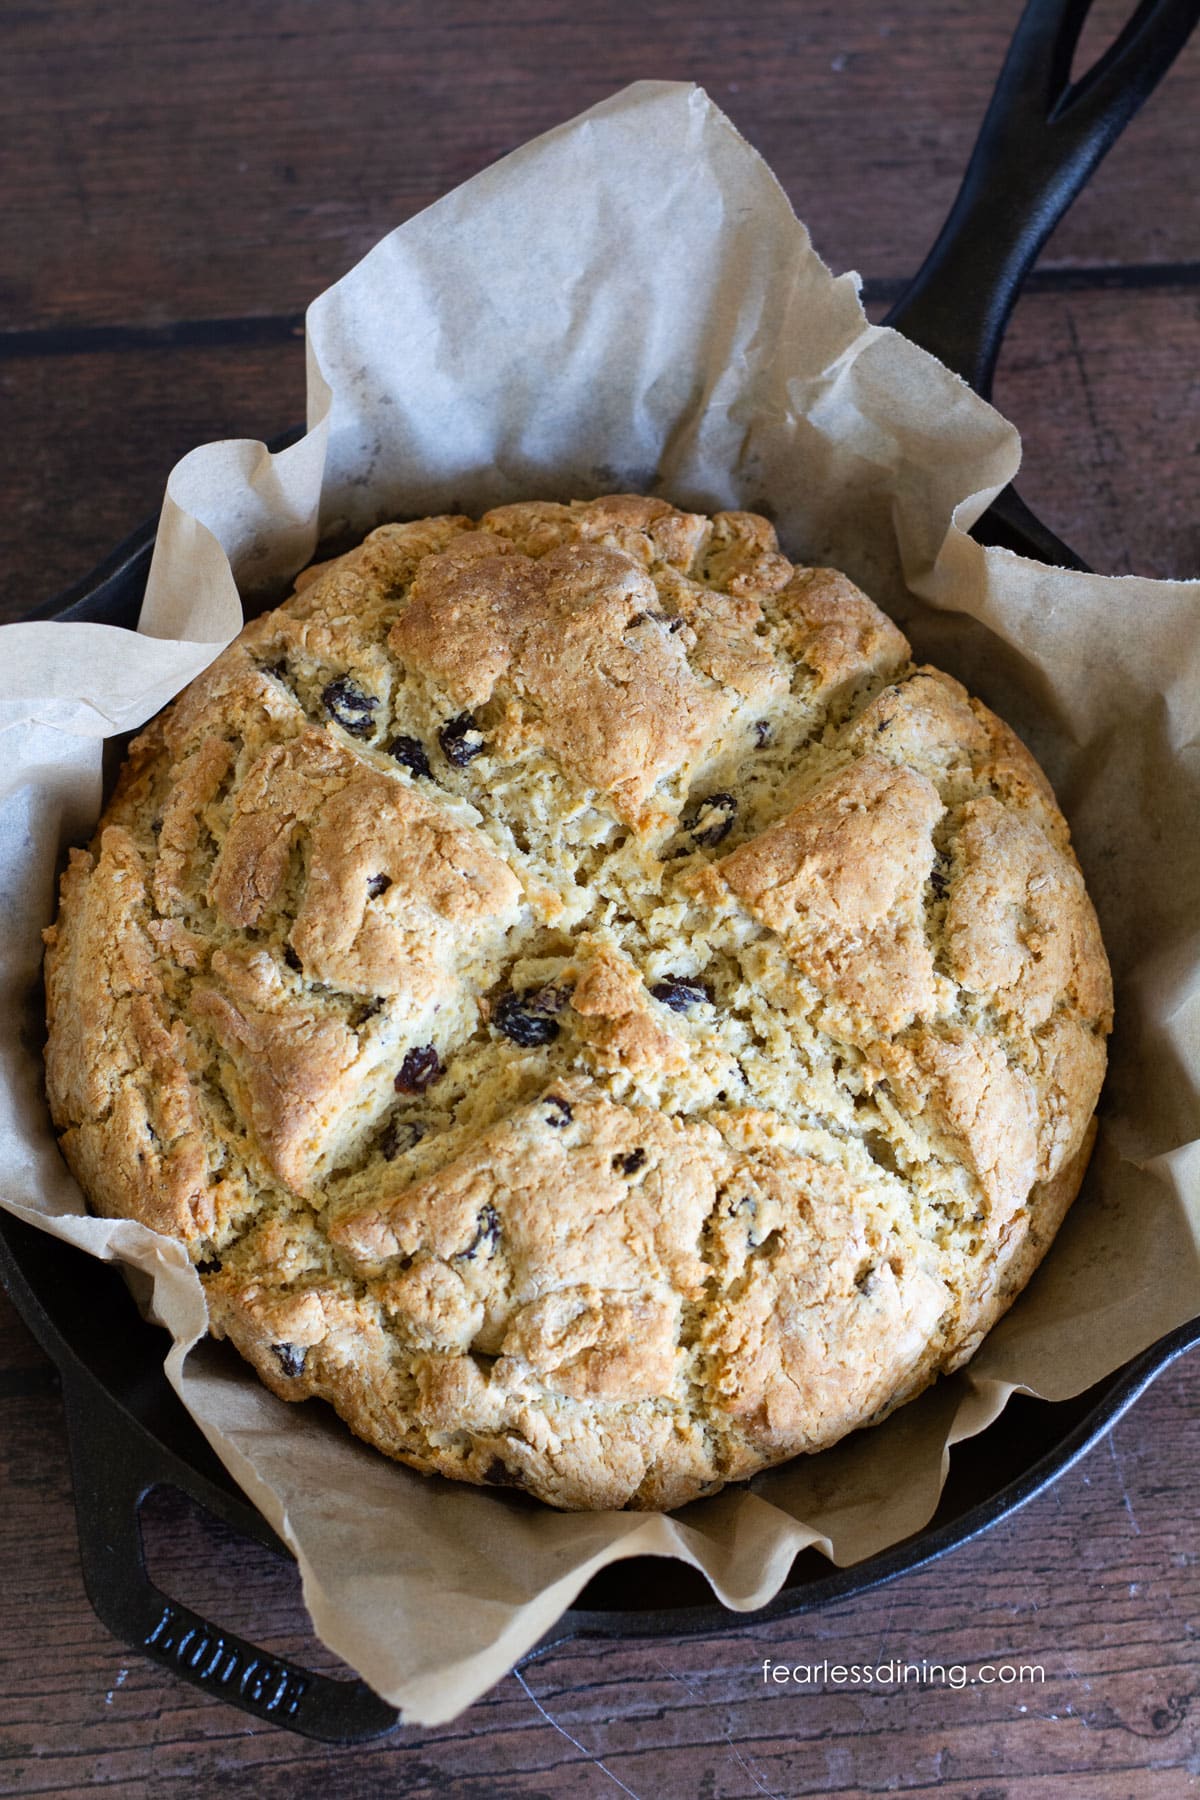 A baked Irish soda bread loaf in a cast iron skillet.